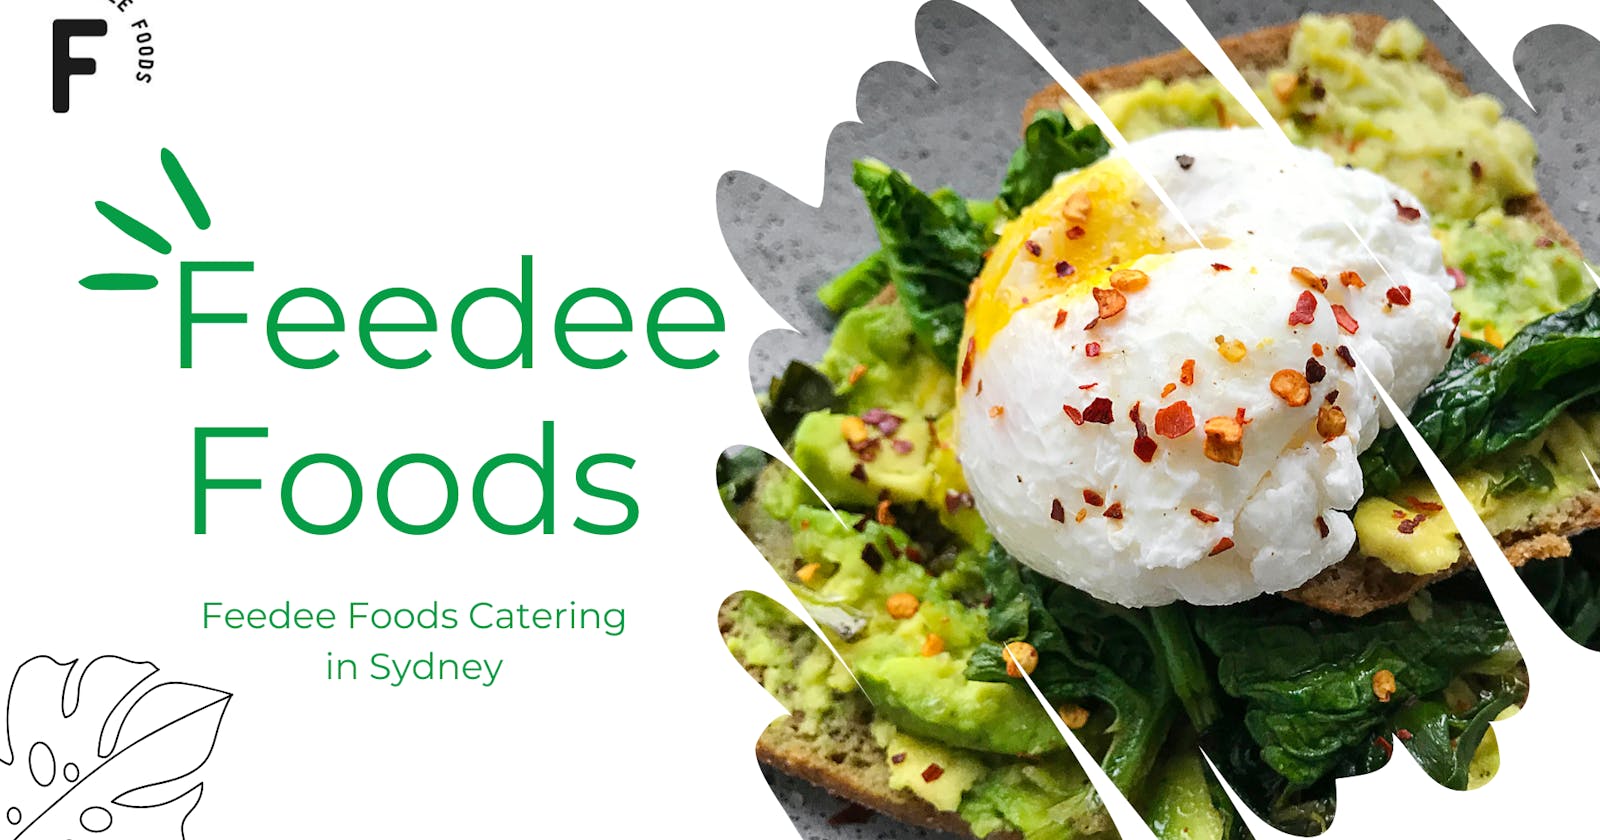 How should Corporate Catering Sydney Deal with Versatility?